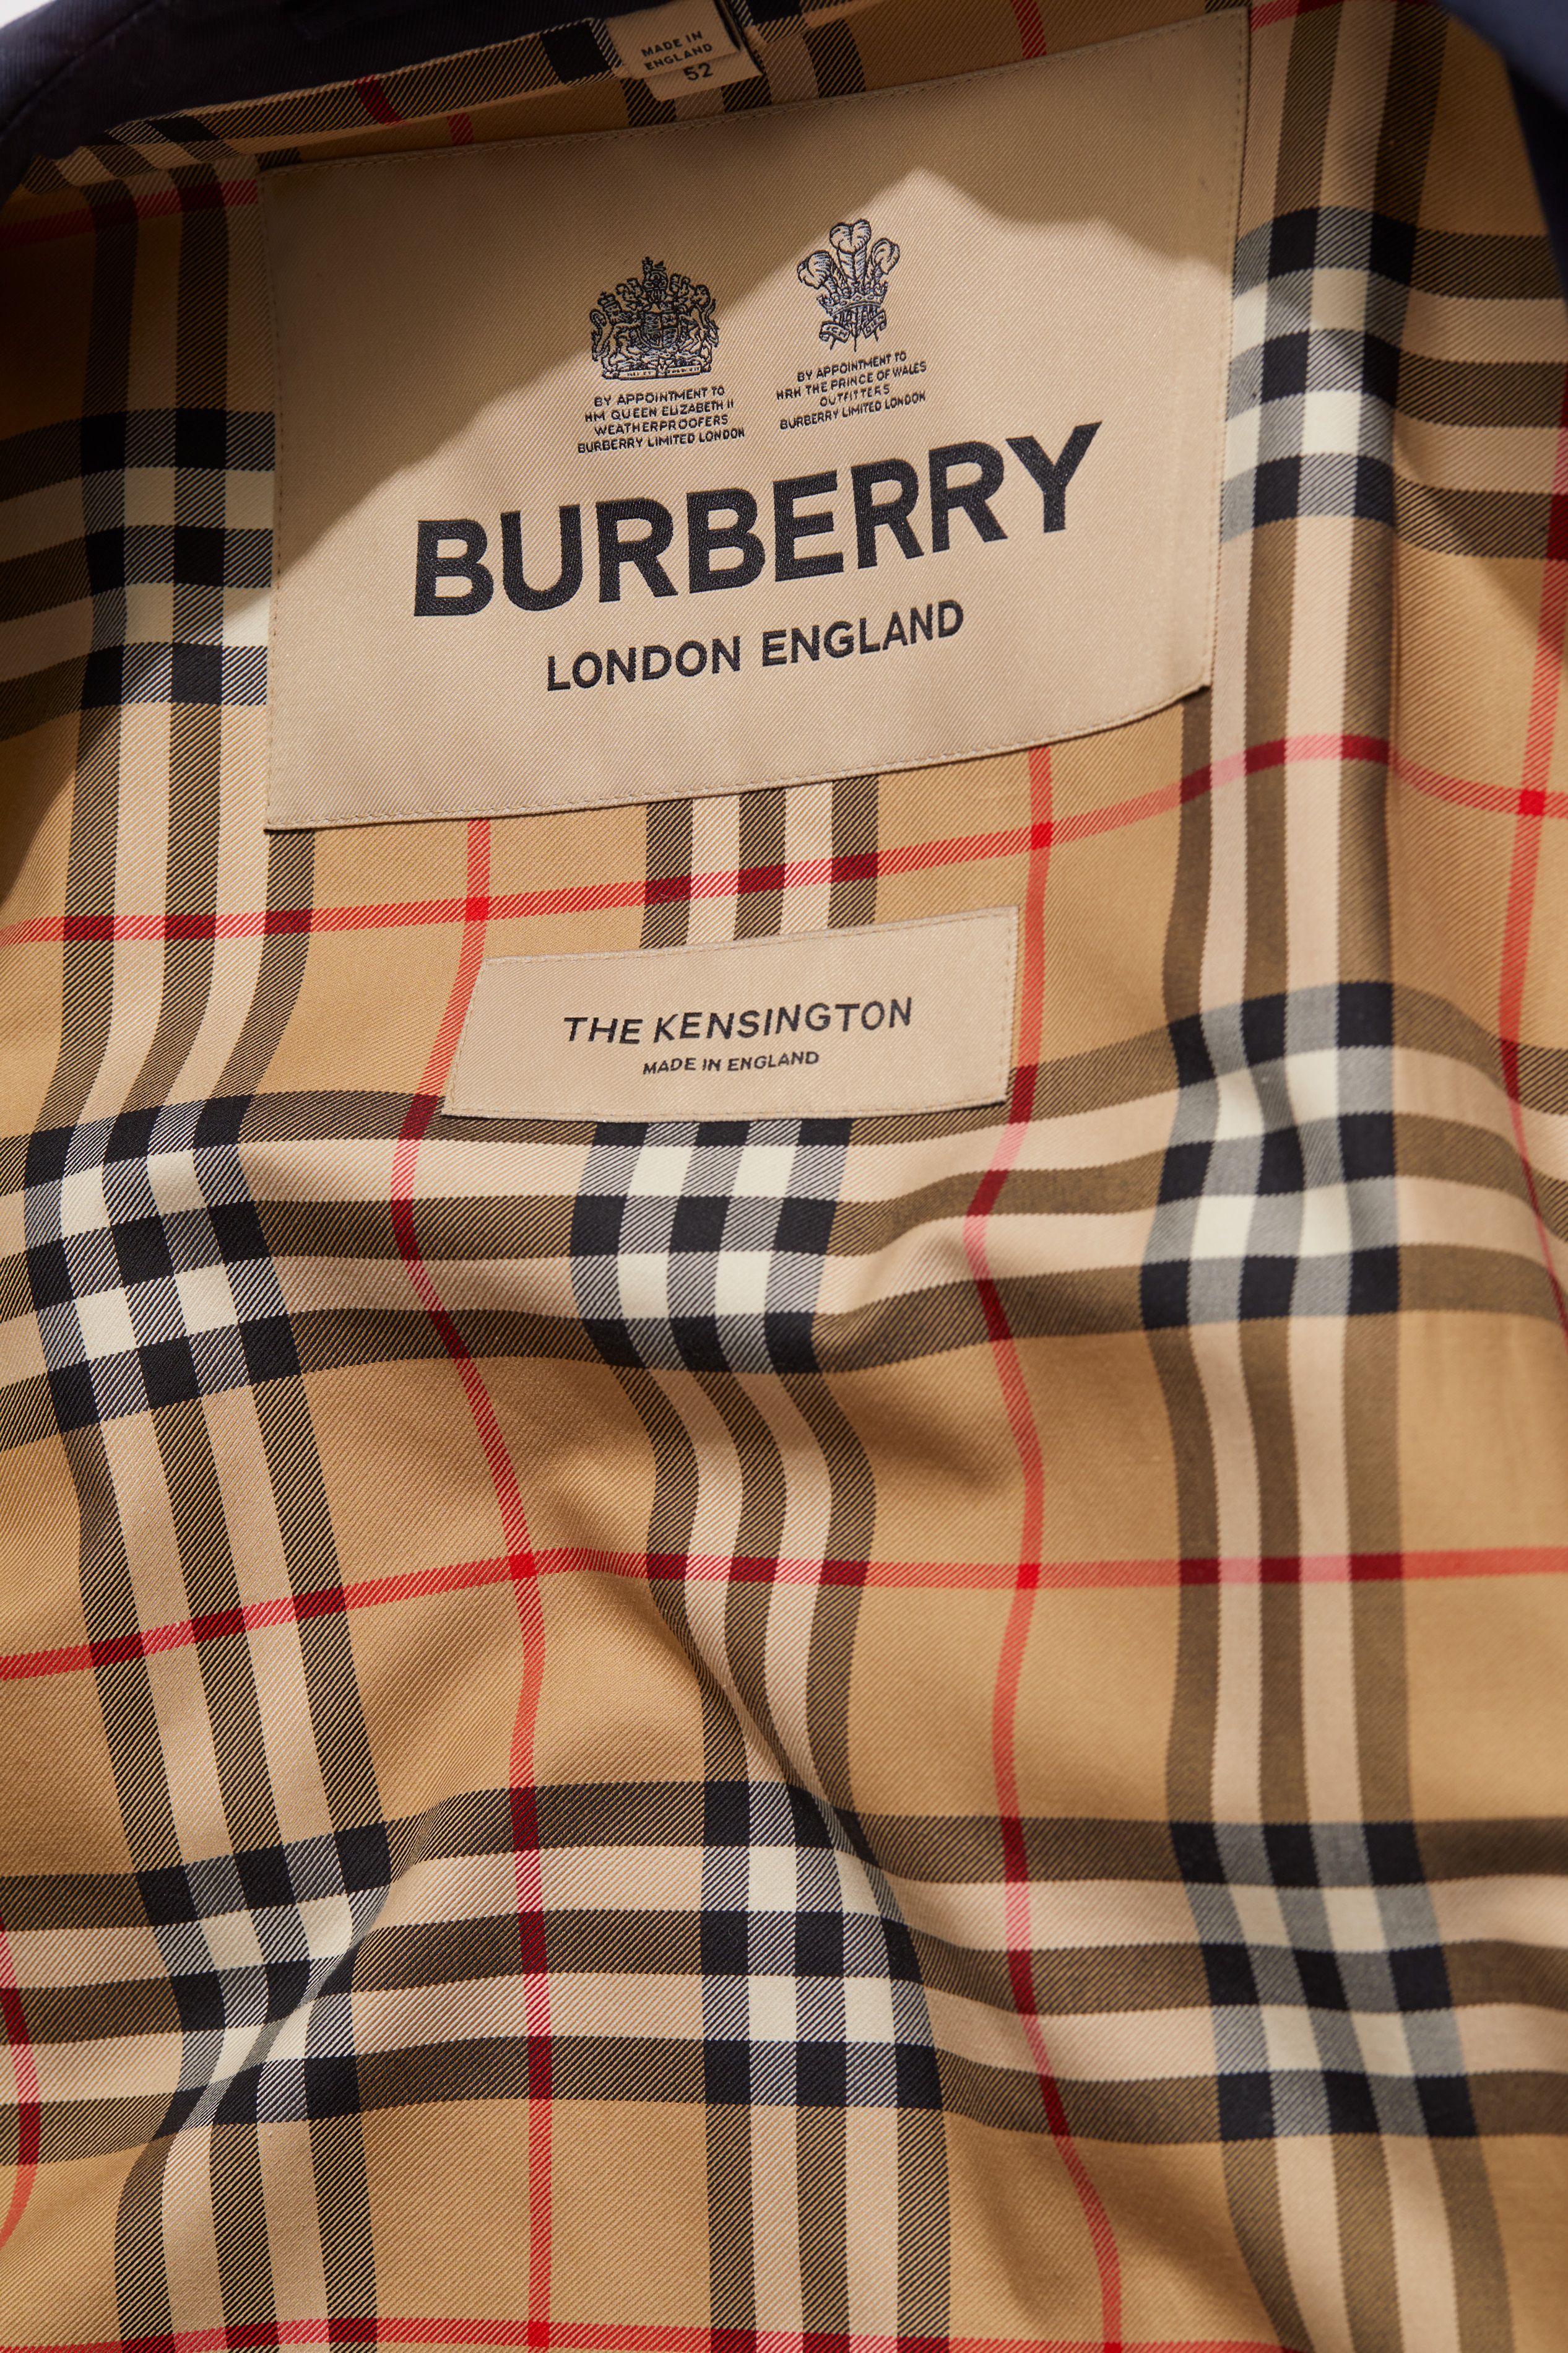 Manhattan Antagonism Truce about burberry client curtain Vibrate